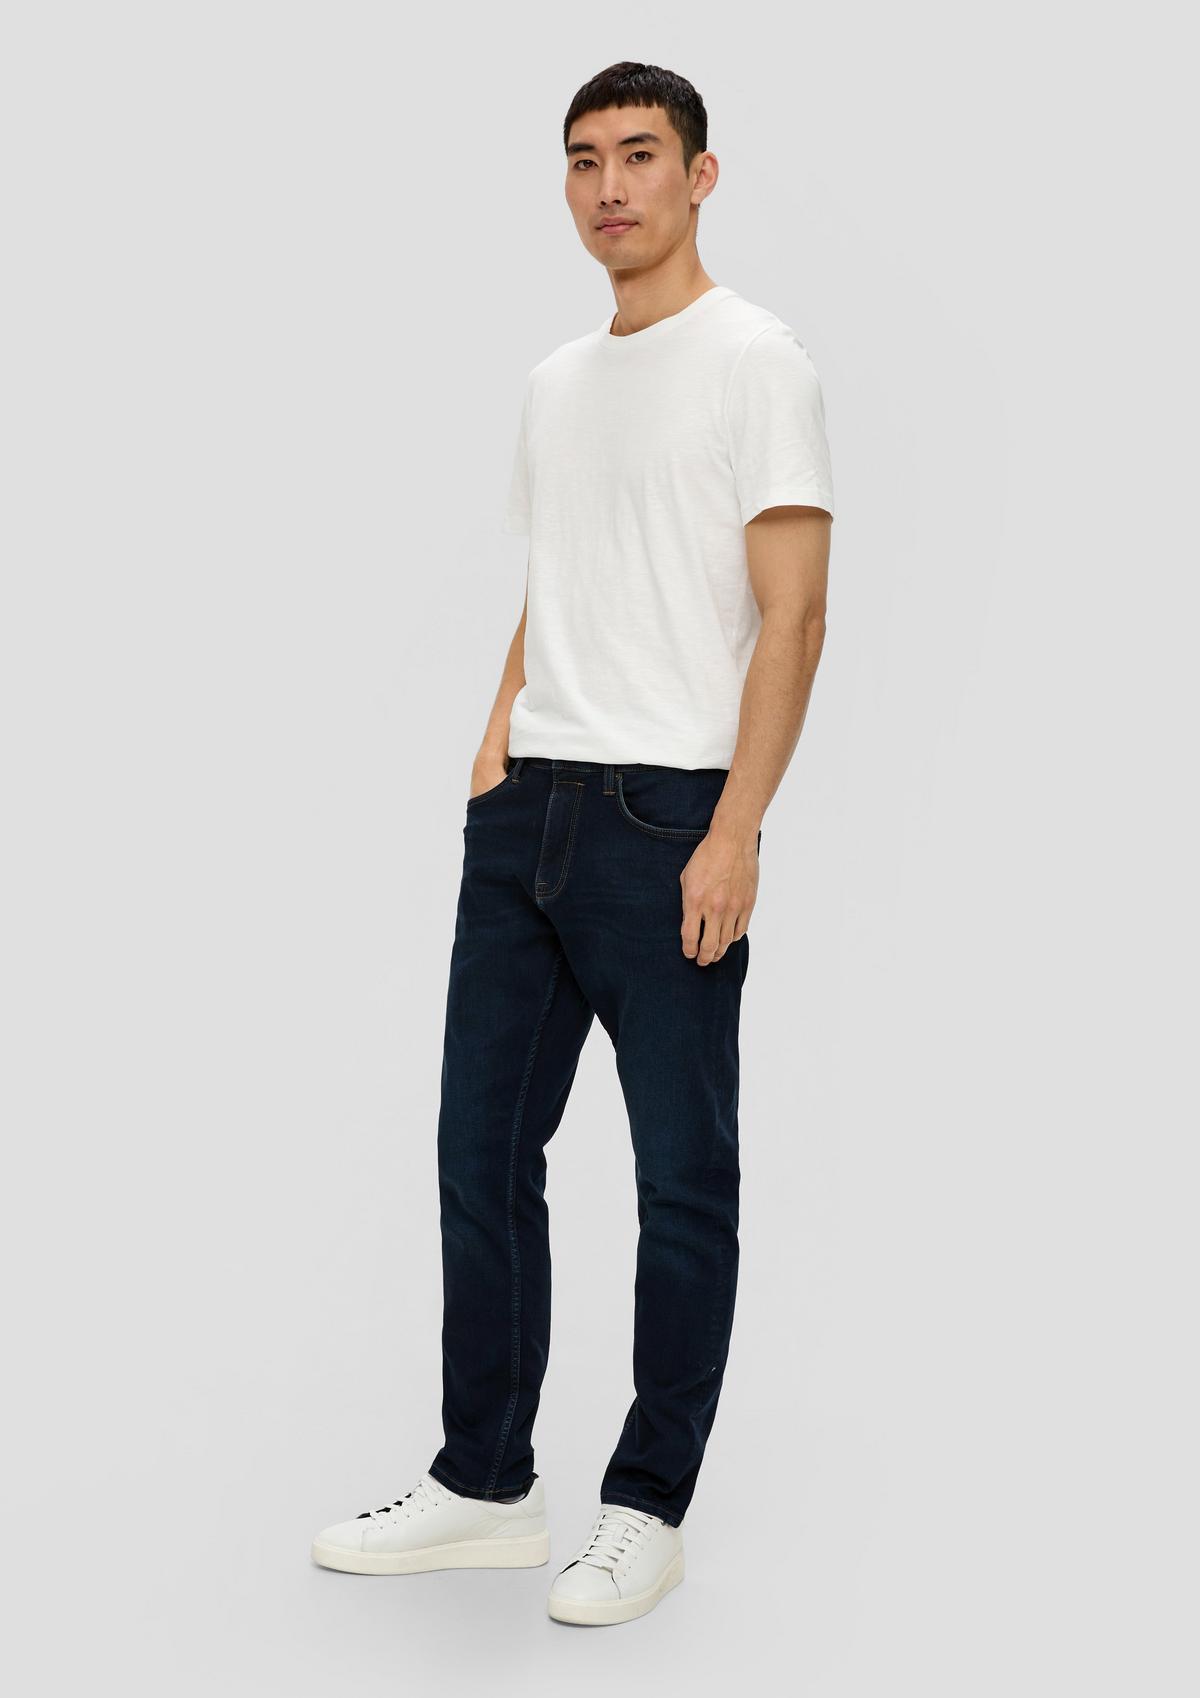 Jeans / Regular Fit / Mid Rise / Tapered Leg